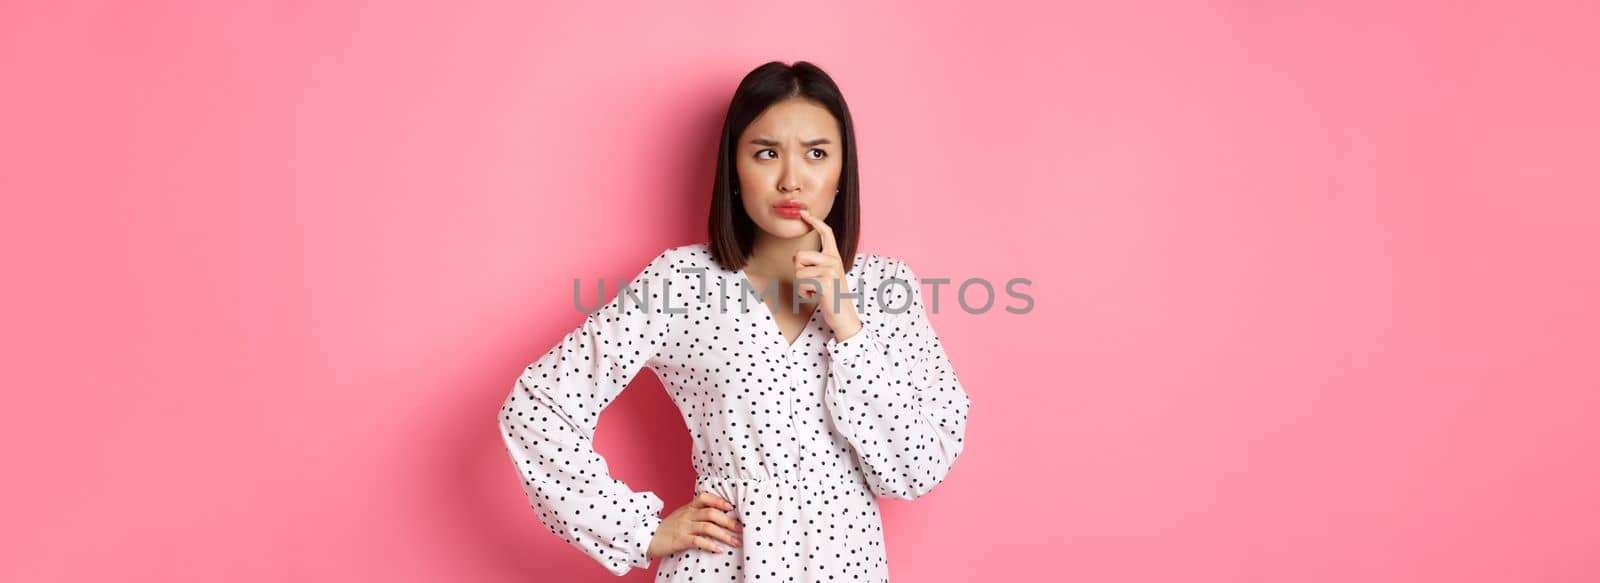 Troubled asian girl making decision, frowning and touching lip while thinking, looking unsure at upper left corner and choosing, standing over pink background.